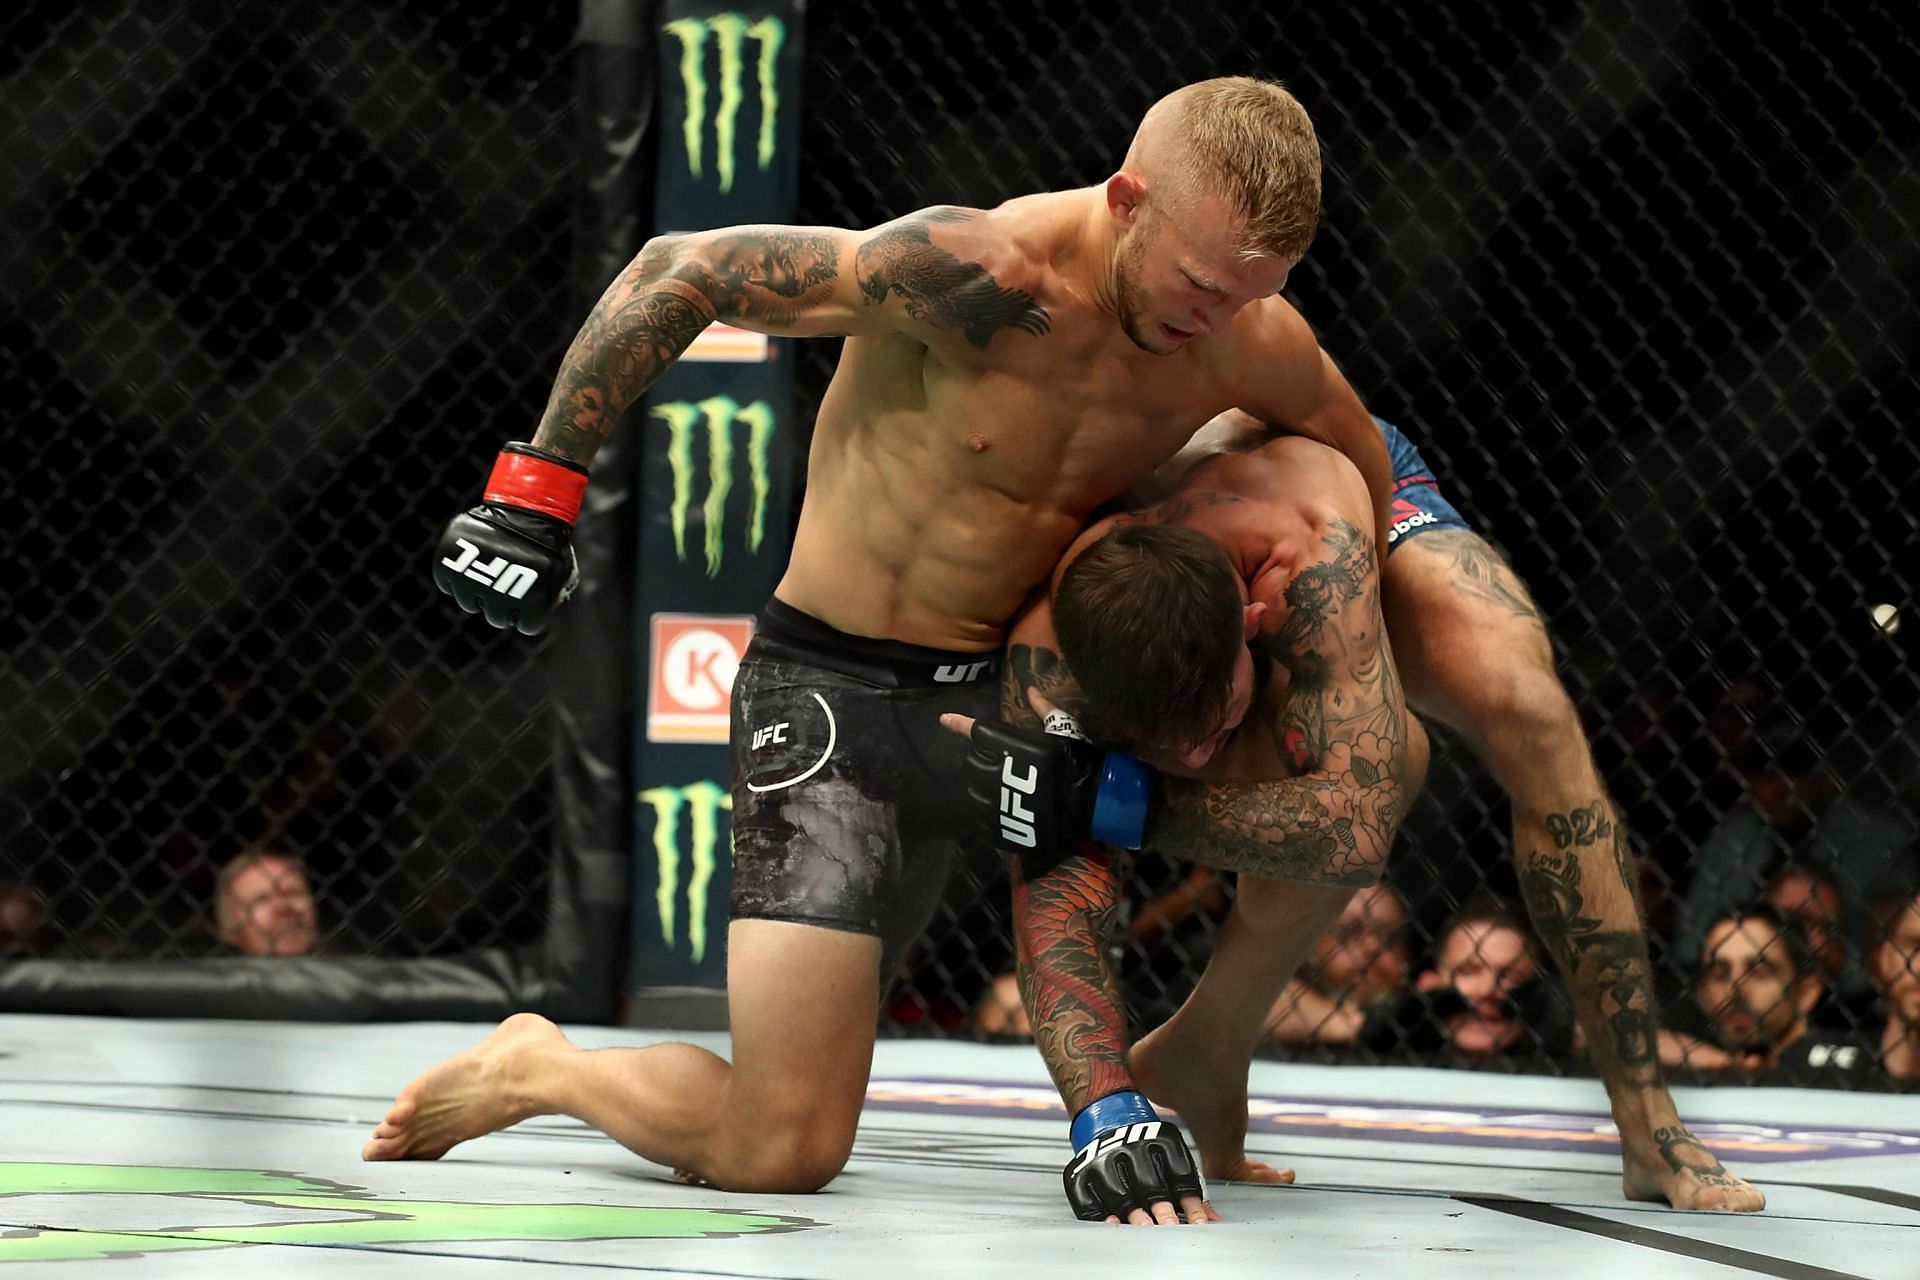 TJ Dillashaw and Cody Garbrandt&rsquo;s bitter rivalry ended with two wins for Dillashaw.